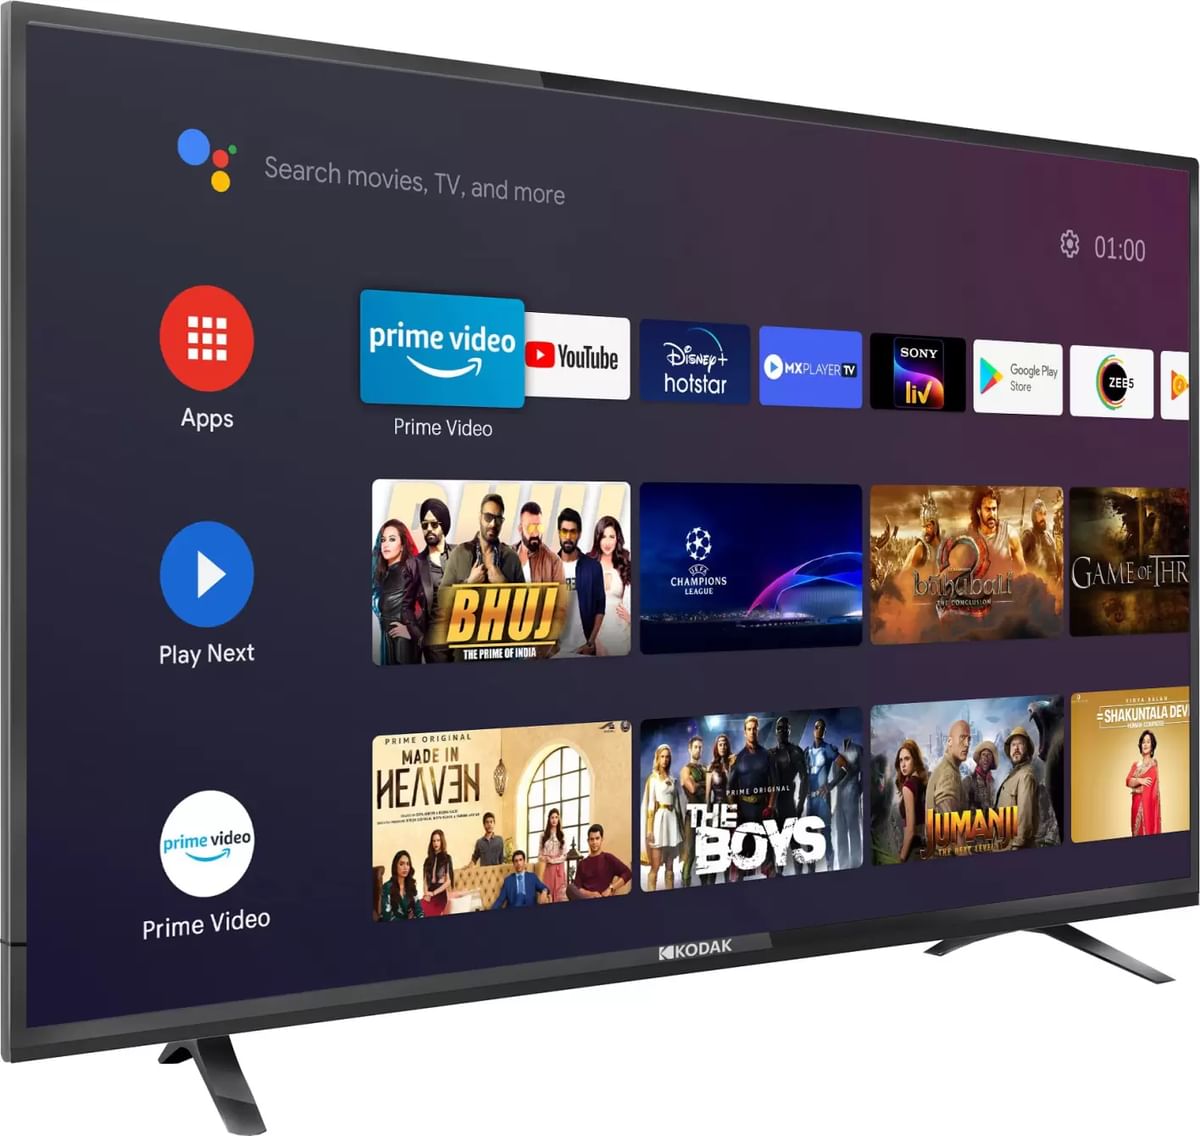 Kodak 32hdx7xpro 32 Inch Hd Ready Smart Led Tv Best Price In India 2022 Specs And Review Smartprix 9272